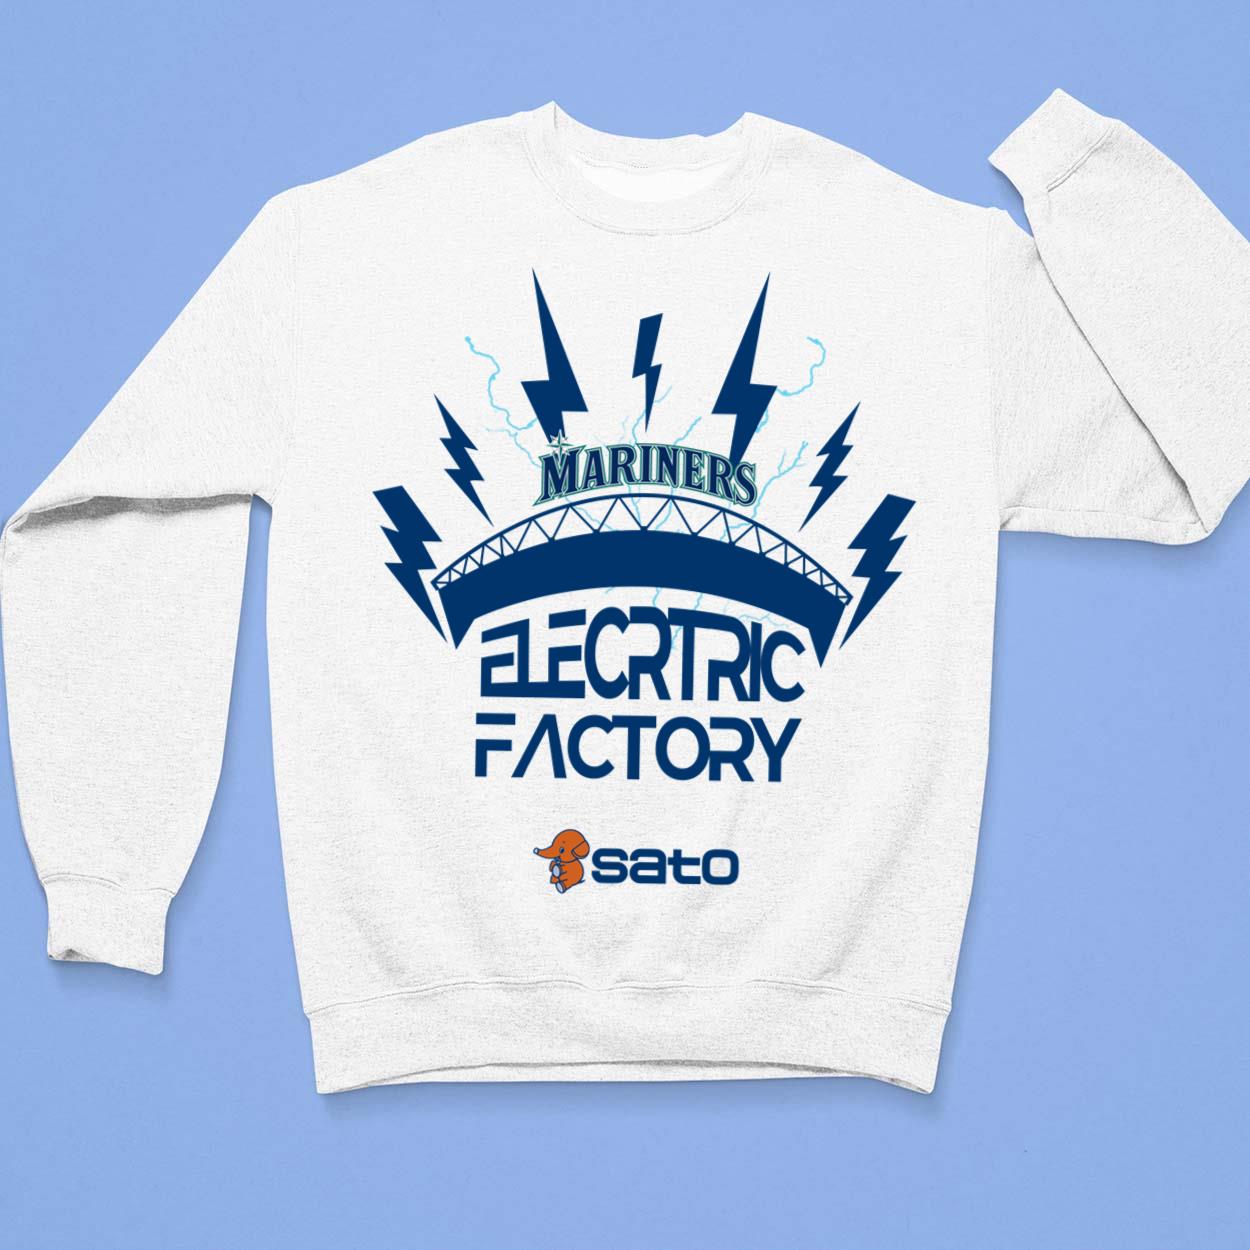 Seattle mariners electric factory shirt